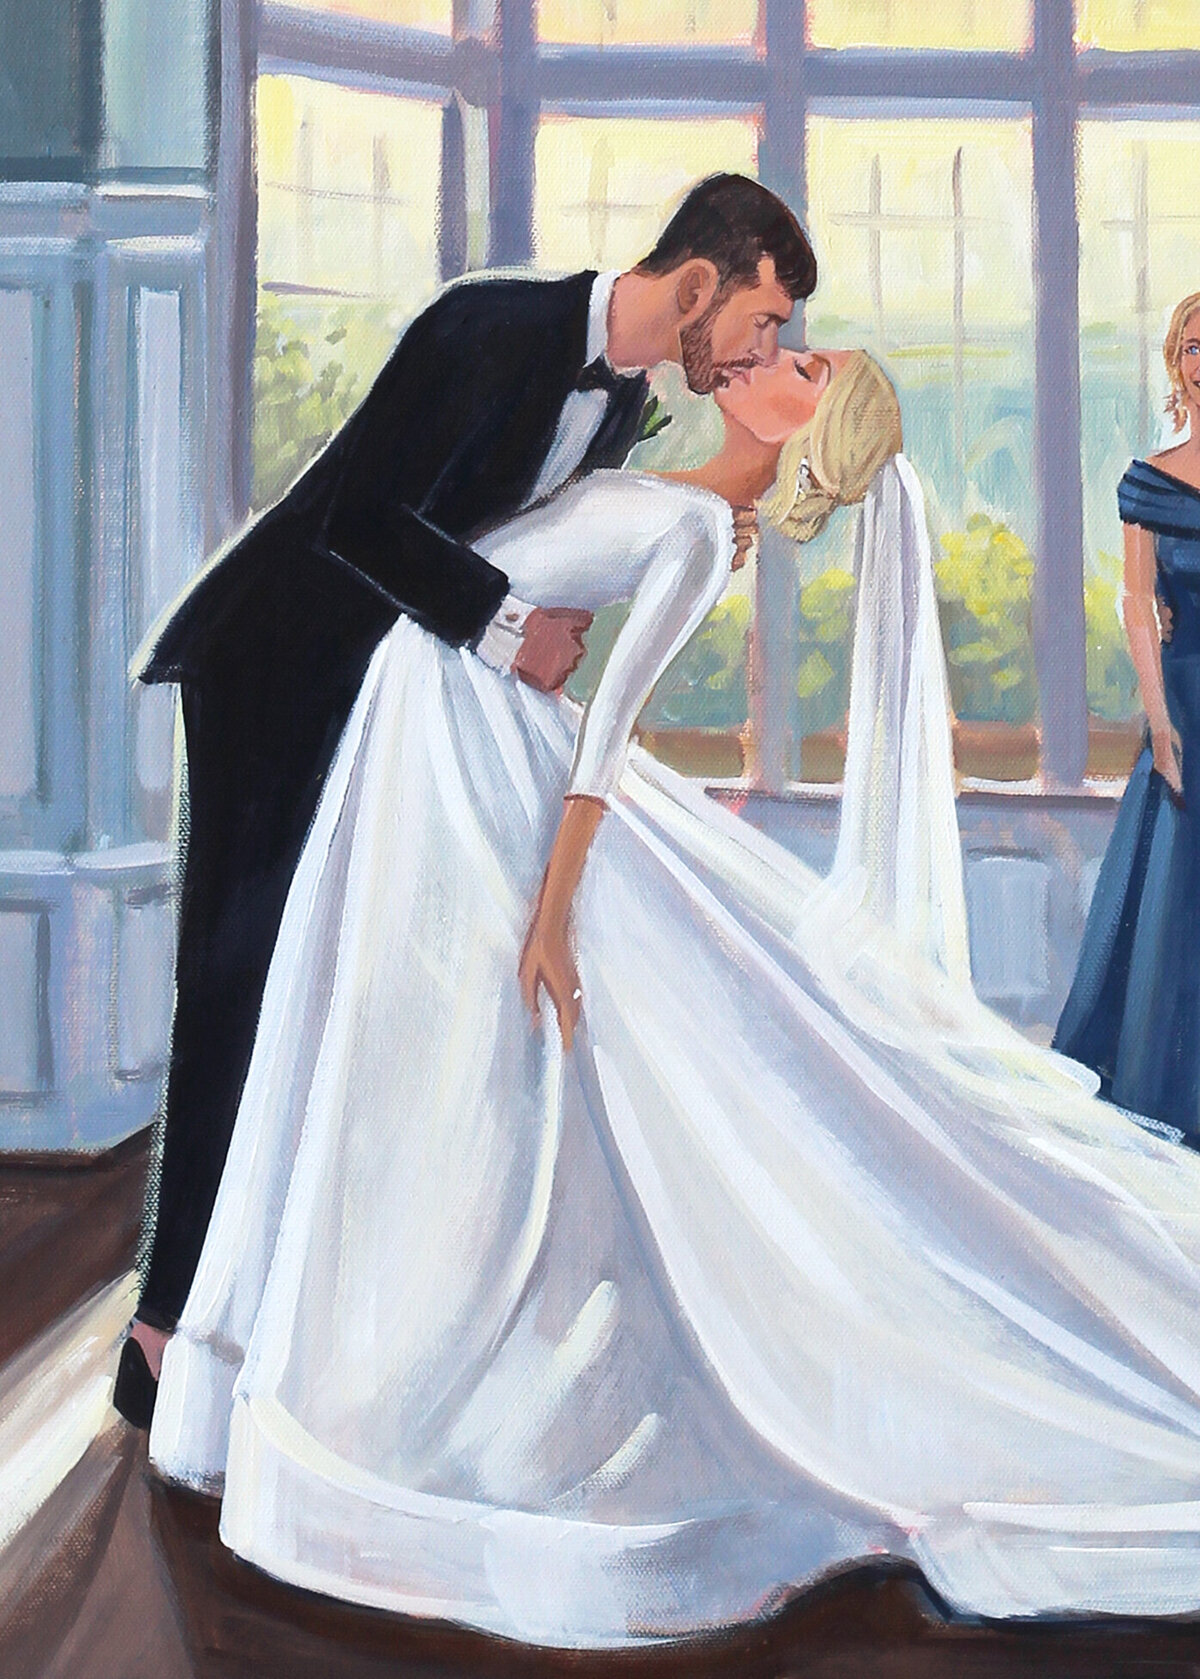 Heather and Alex, River Run Estate, Live Wedding Painting, detail